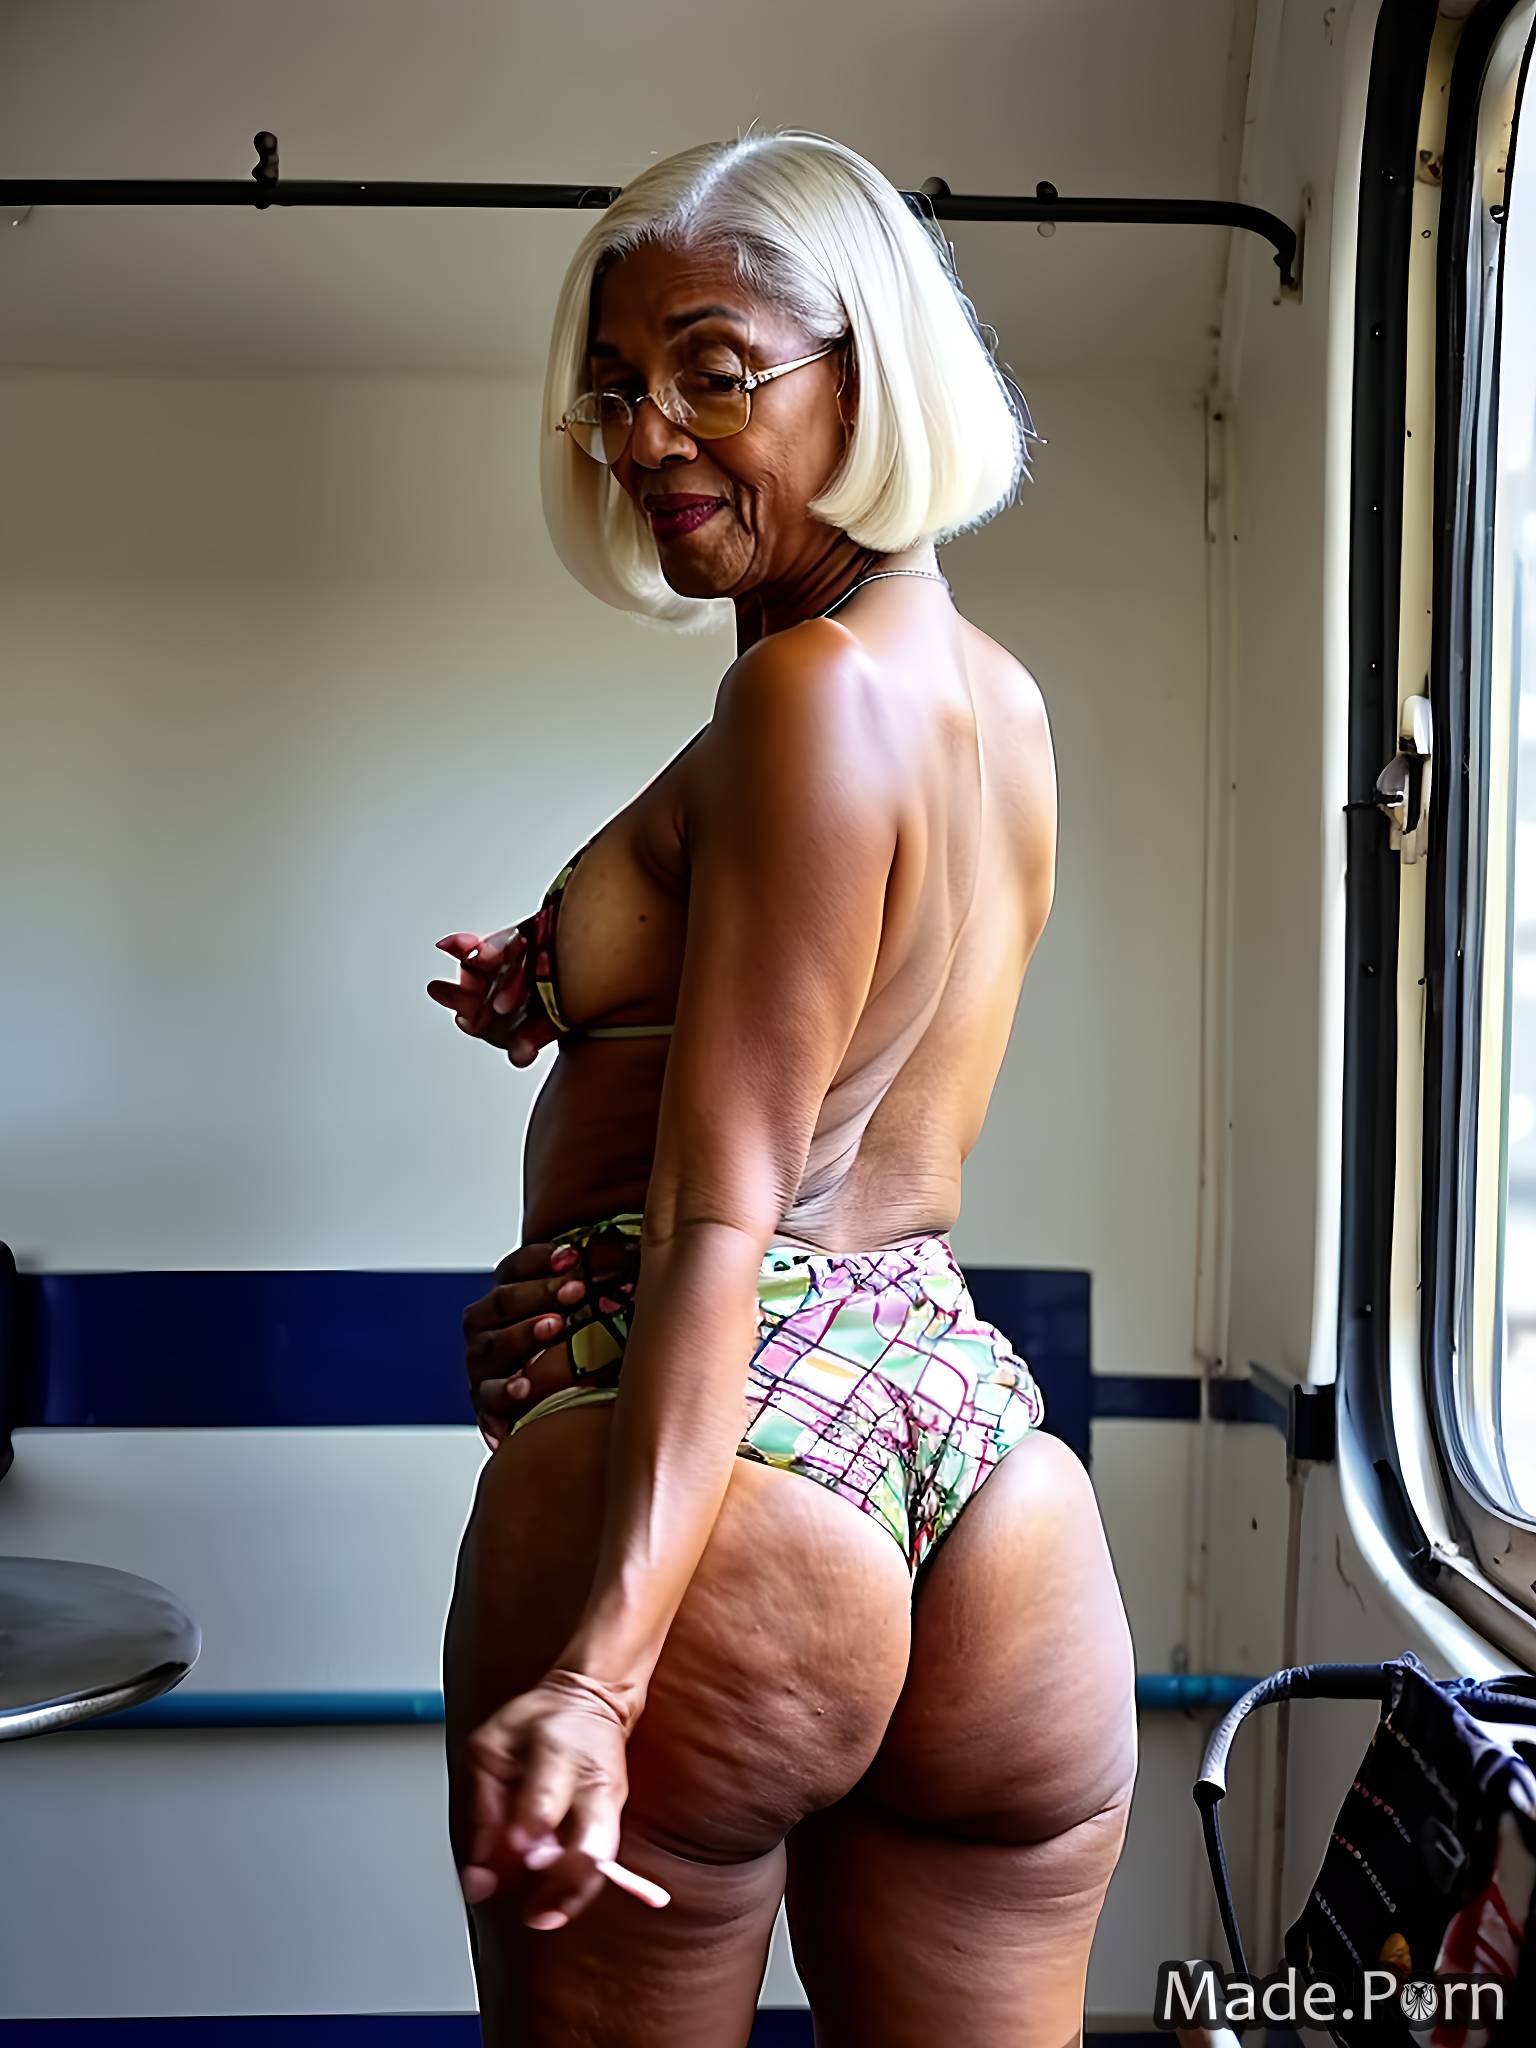 80 white hair standing small ass cinematic nigerian woman